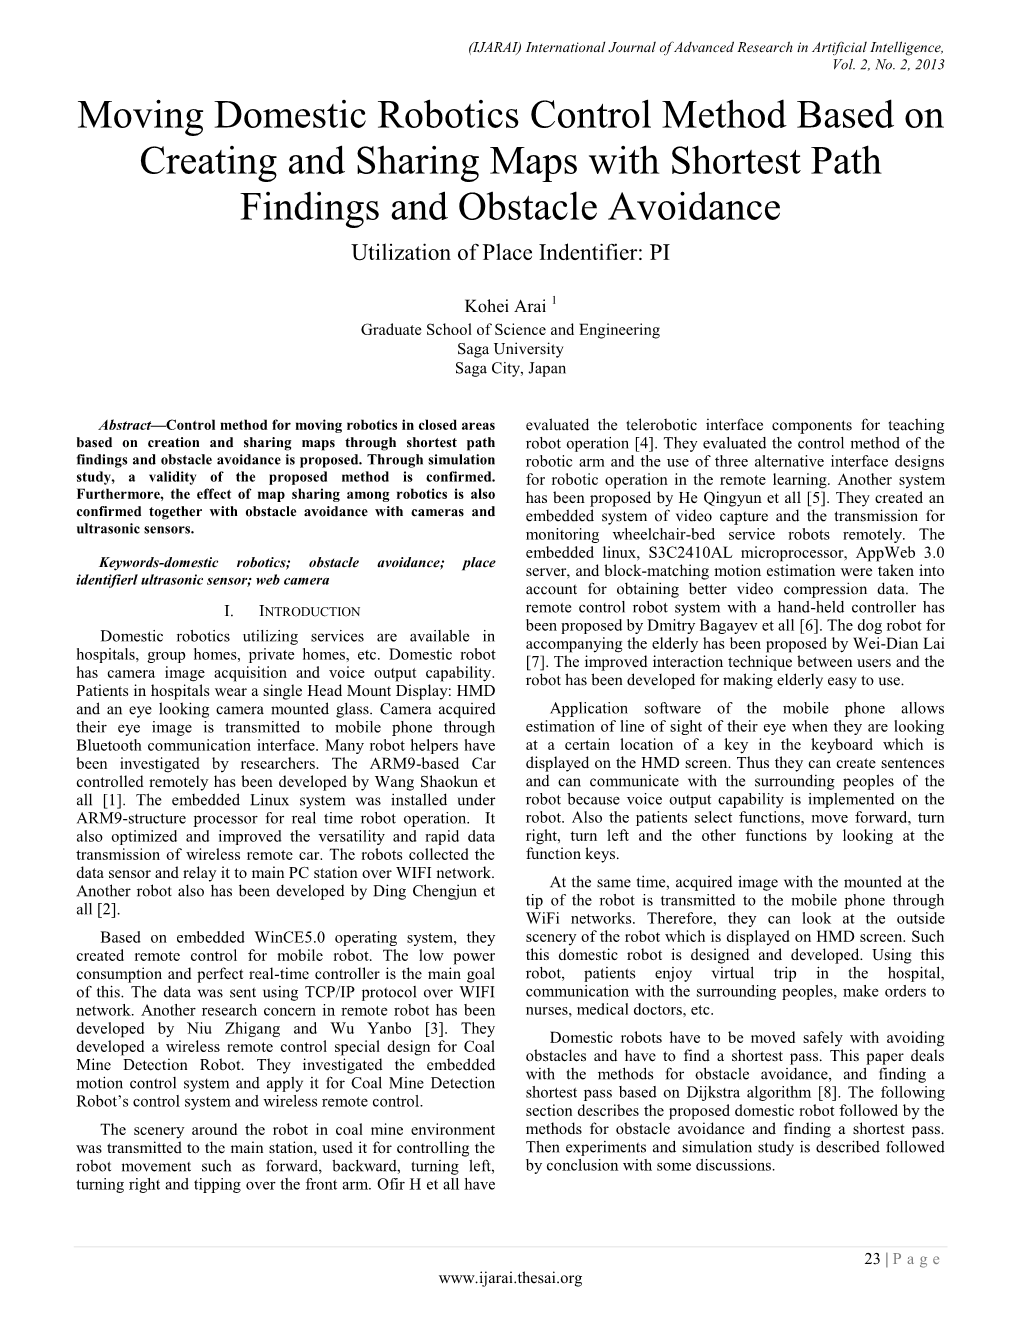 Moving Domestic Robotics Control Method Based on Creating and Sharing Maps with Shortest Path Findings and Obstacle Avoidance Utilization of Place Indentifier: PI